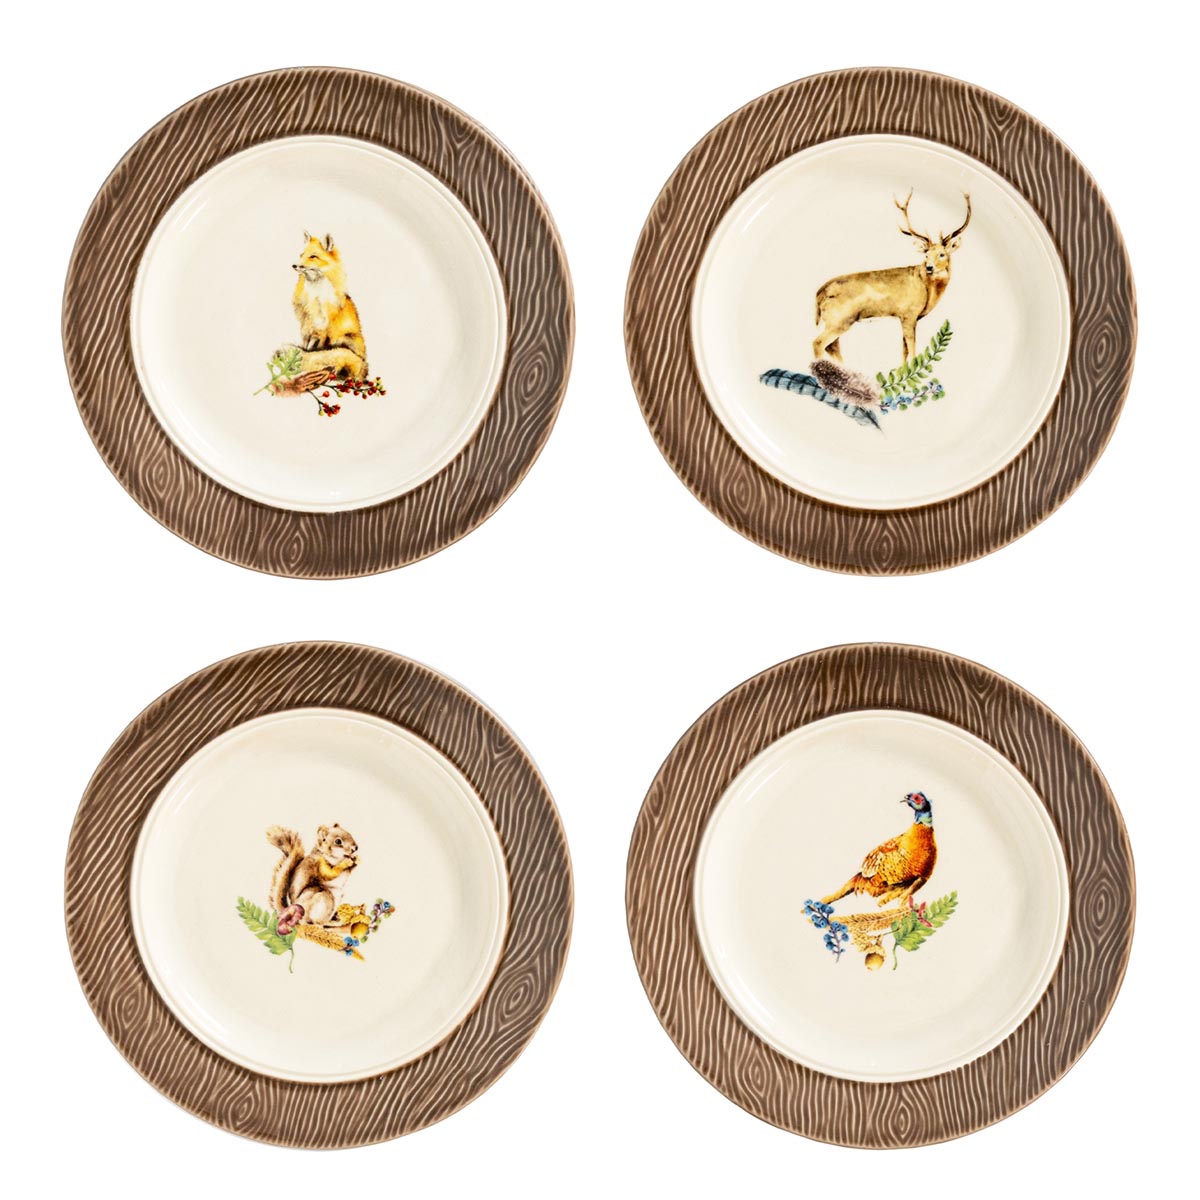 This set of four cocktail plates features a stately stag, regal pheasant, thoughtful fox, and charming squirrel, and is designed to complement your existing Forest Walk dinnerware.